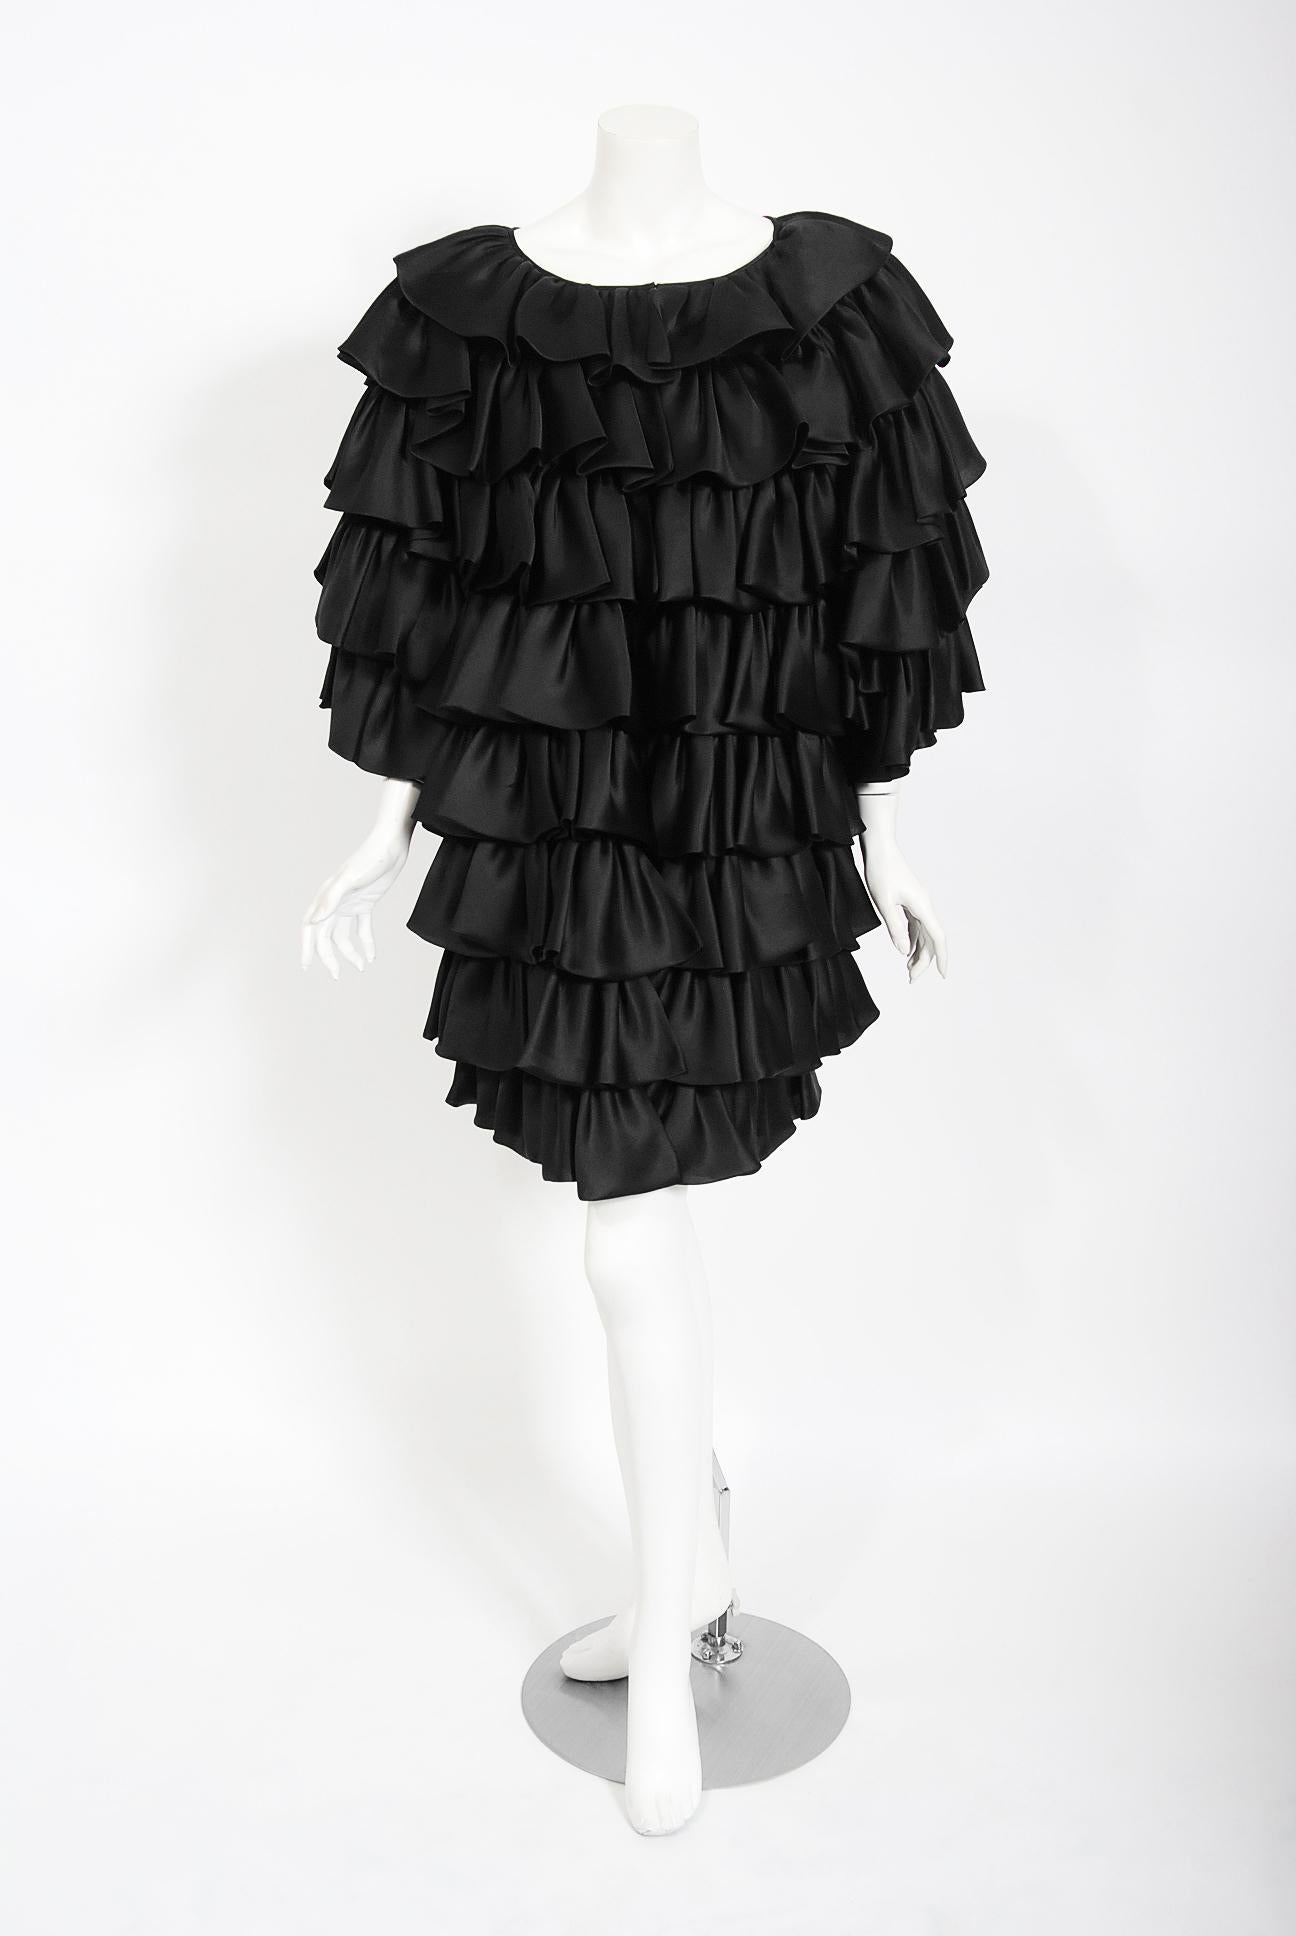 A gorgeous early 1990's Oscar de la Renta black silk tiered-ruffle jacket which cost well over $4,000 when new.   Oscar de la Renta was one of the world's leading fashion designers. Trained by Cristóbal Balenciaga and Antonio Castillo, he became